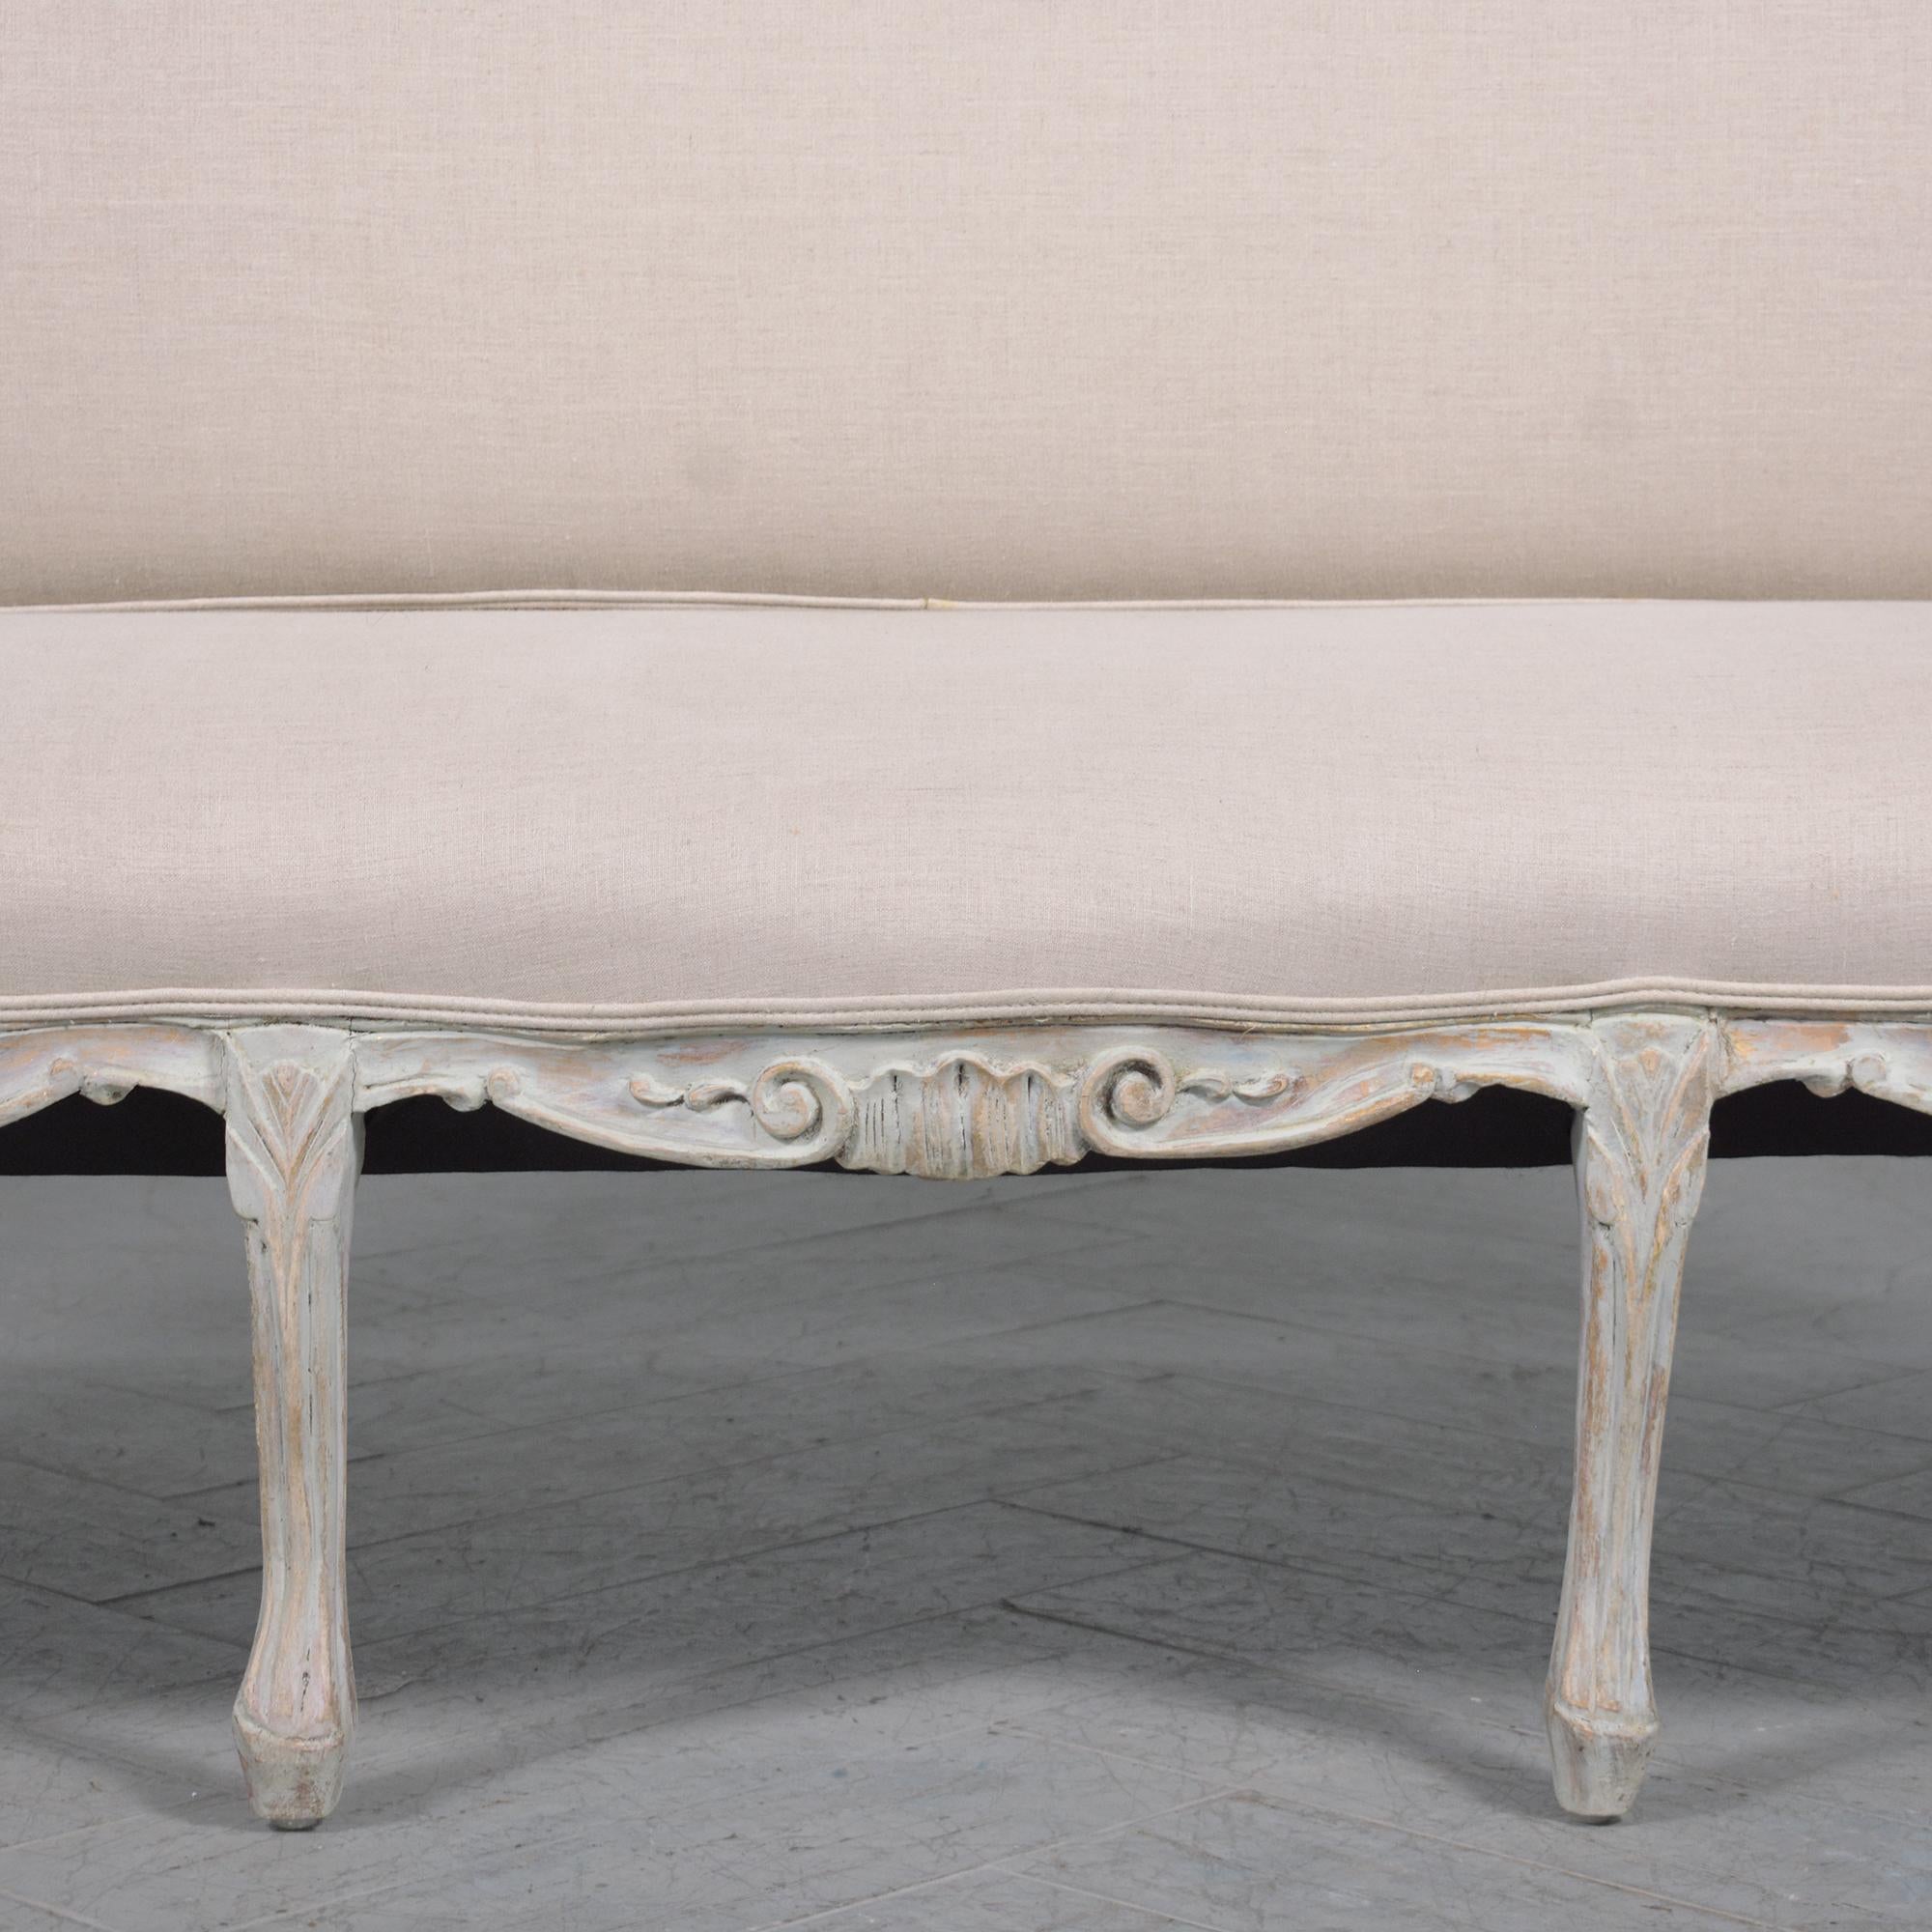 Early 1900s French Sofa: Timeless Elegance in Hand-Carved Wood In Good Condition For Sale In Los Angeles, CA